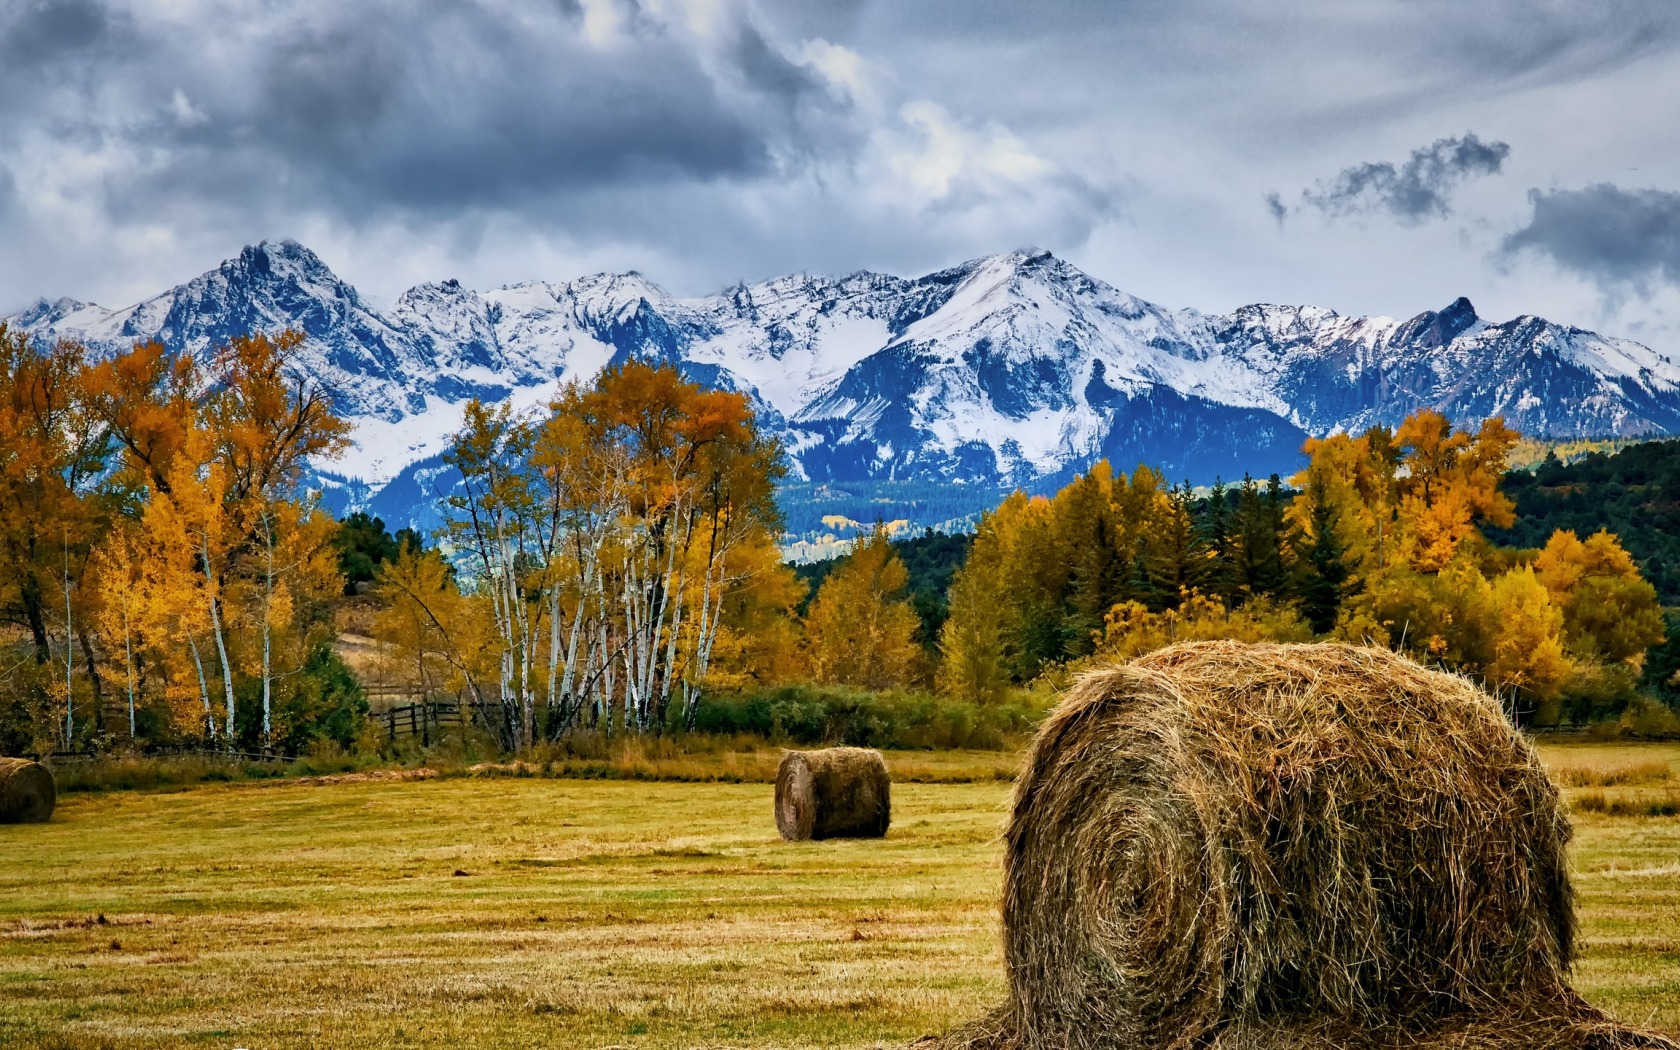 General 1680x1050 field nature mountains landscape trees hay bales fall